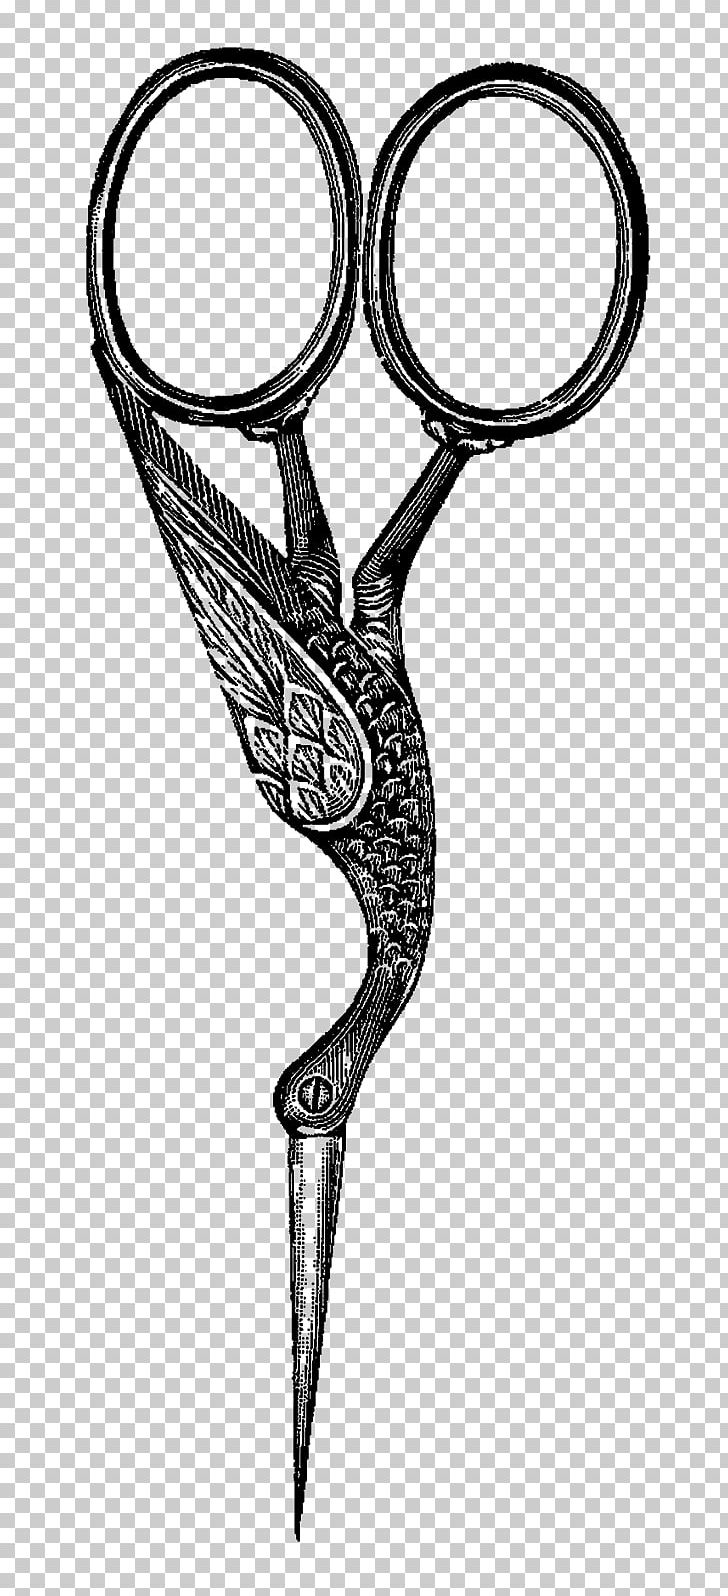 Scissors Bird Hair-cutting Shears PNG, Clipart, Bird, Black And White, Blog, Clip Art, Digital Illustration Free PNG Download